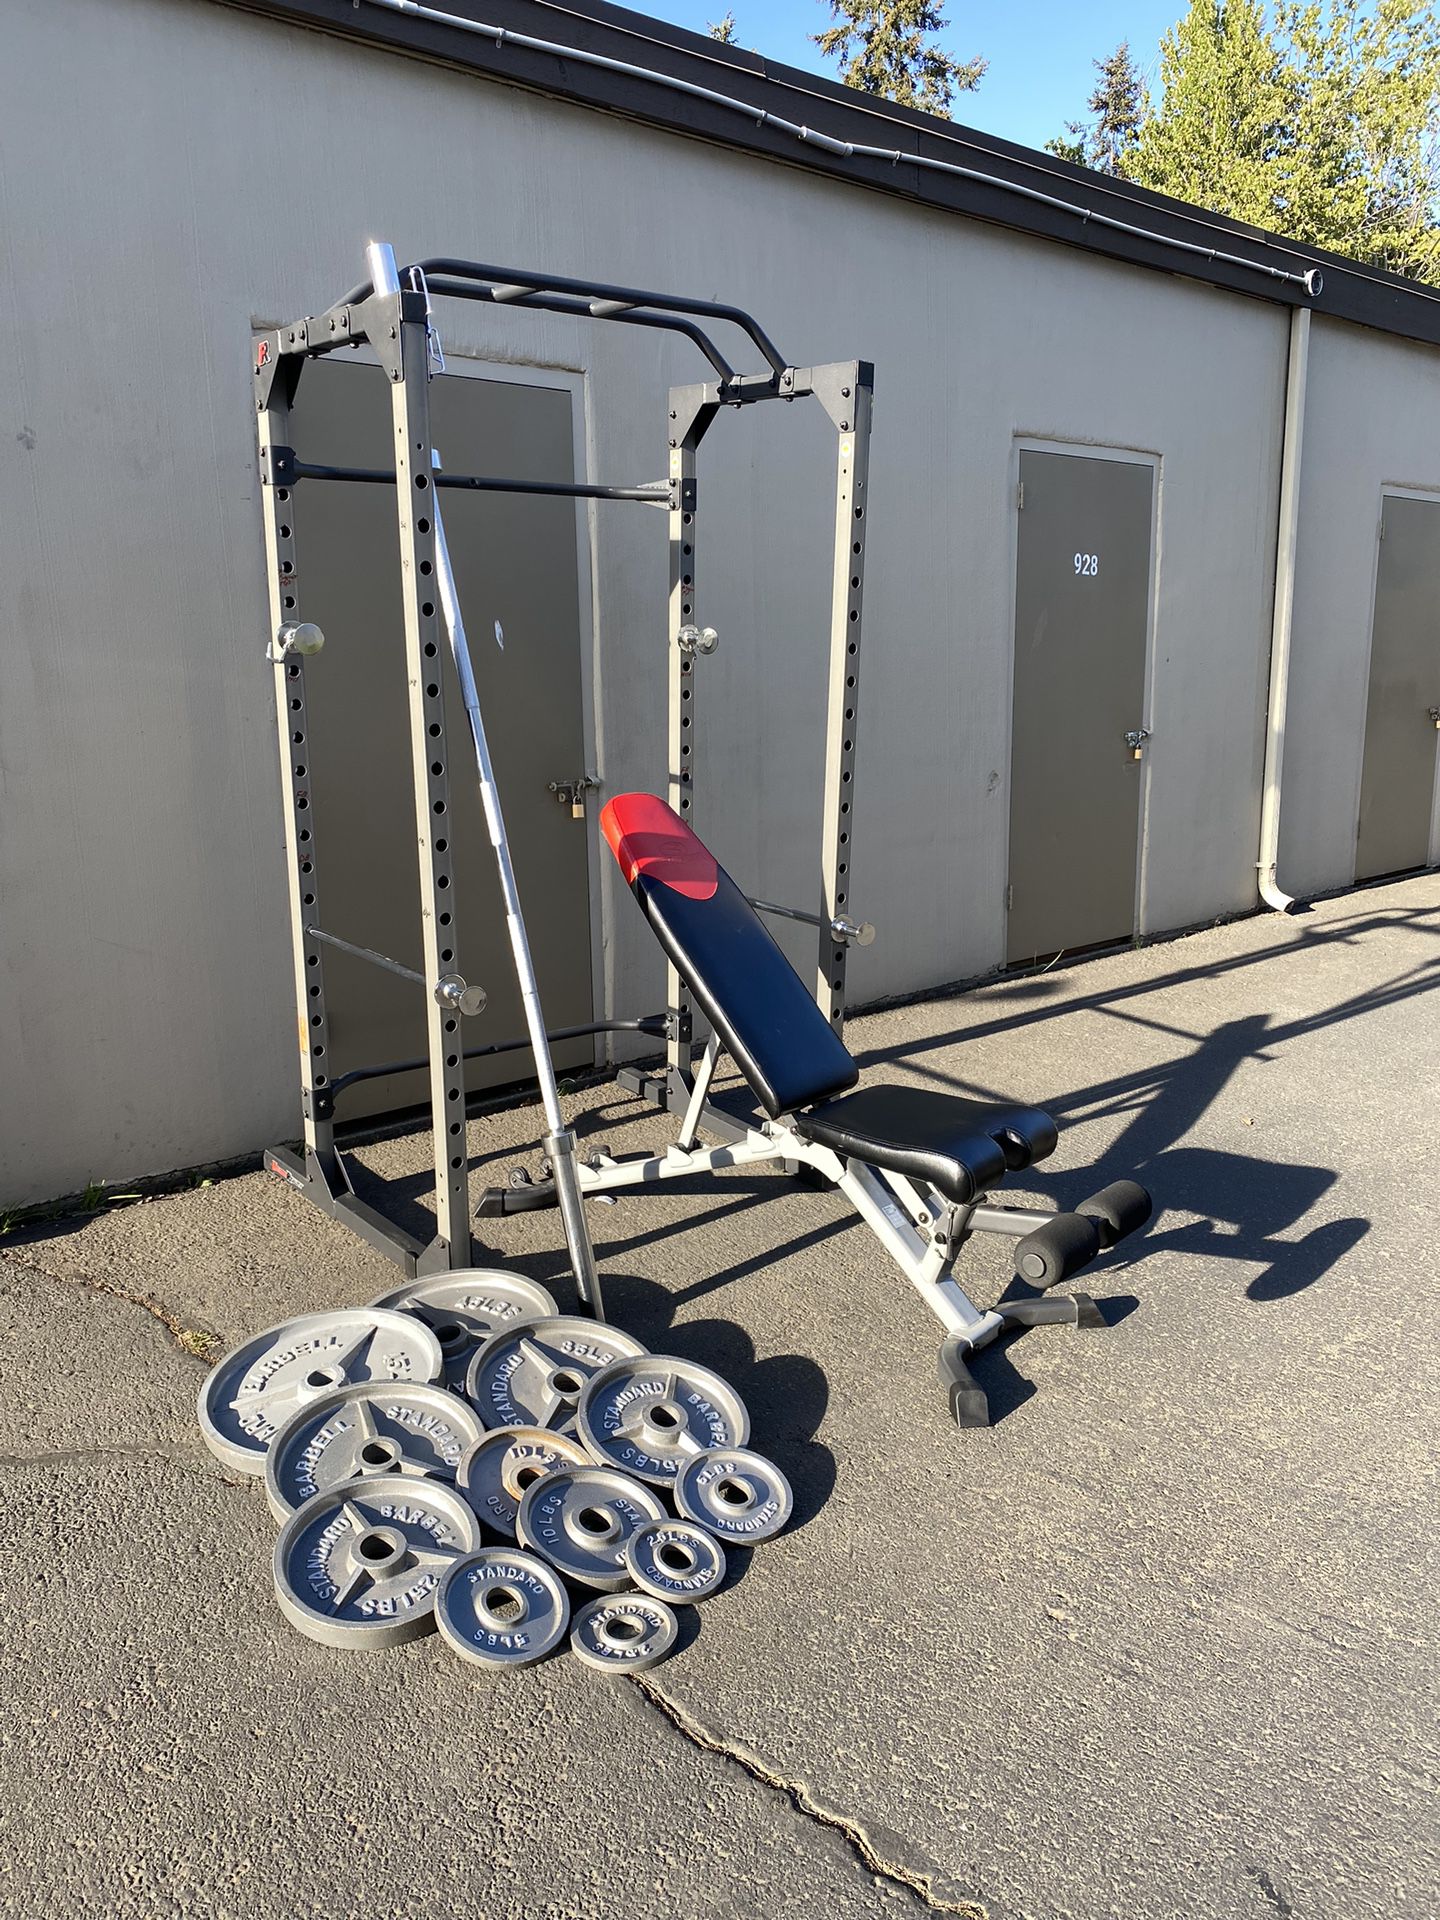 Power Rack Weights Barbell Bench 